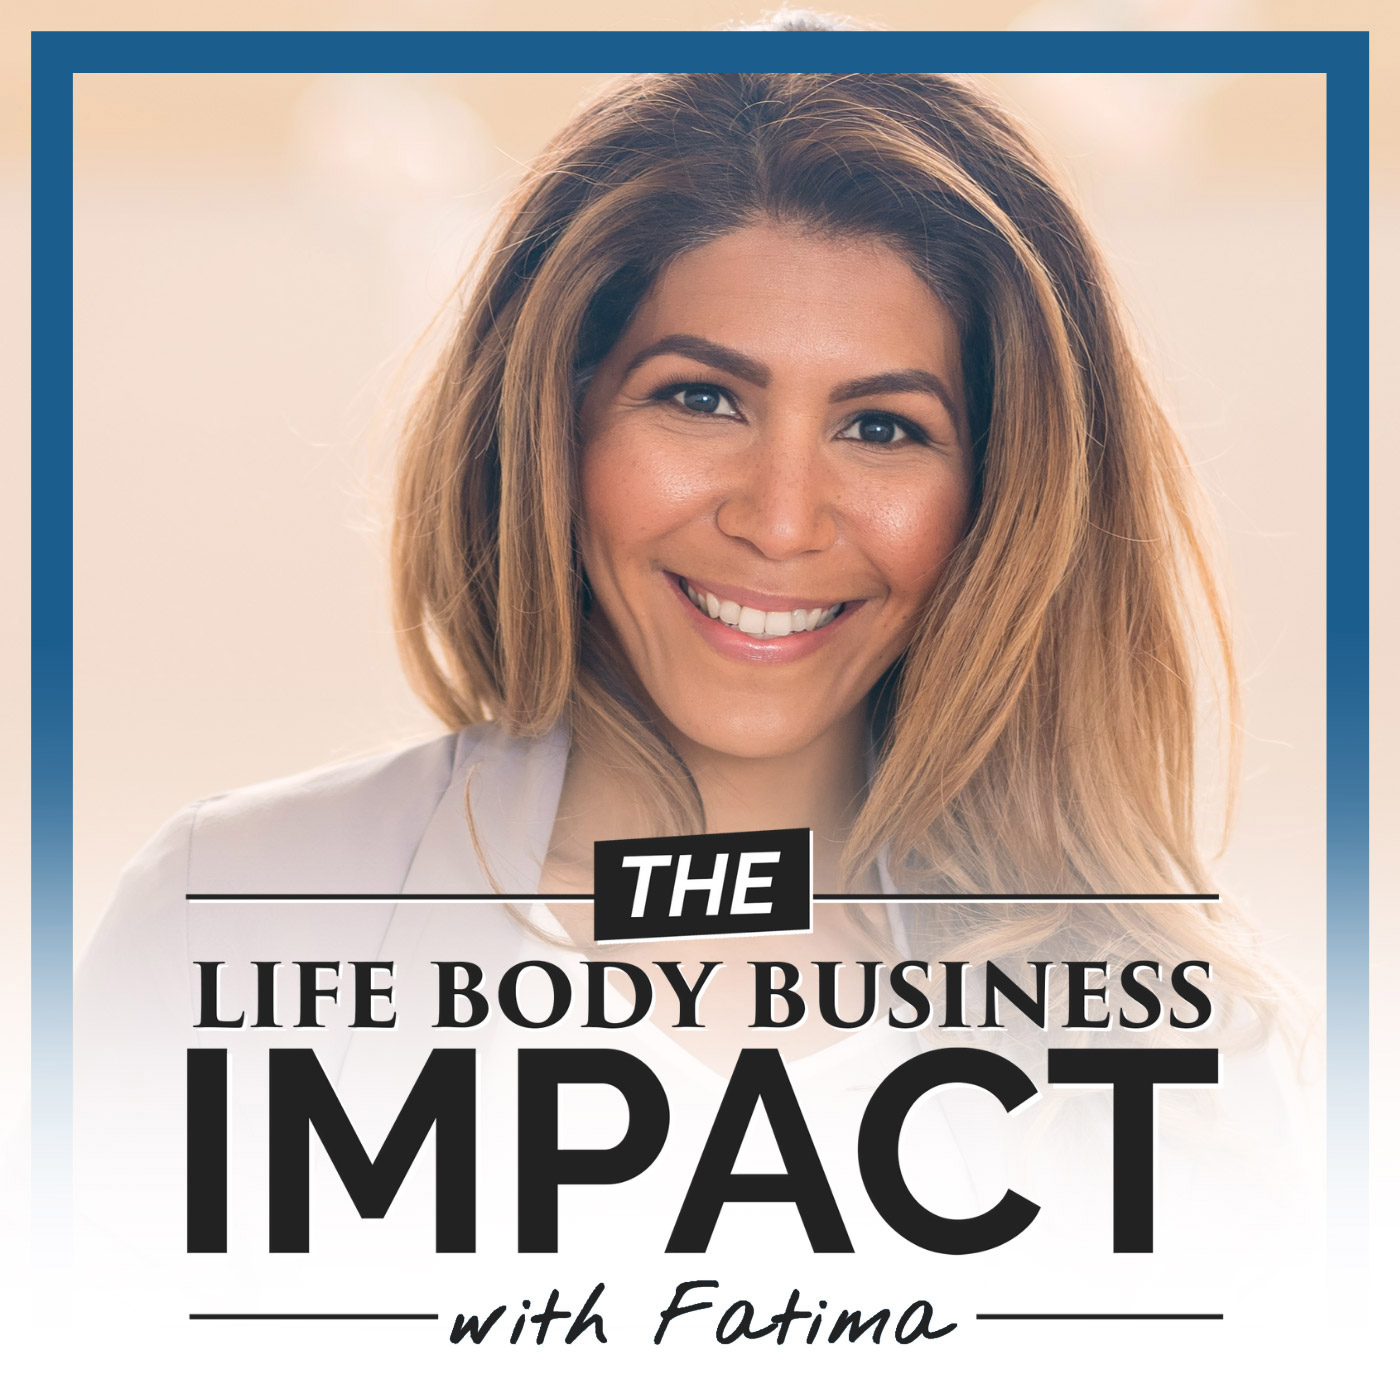 The Life Body Business Impact with Fatima